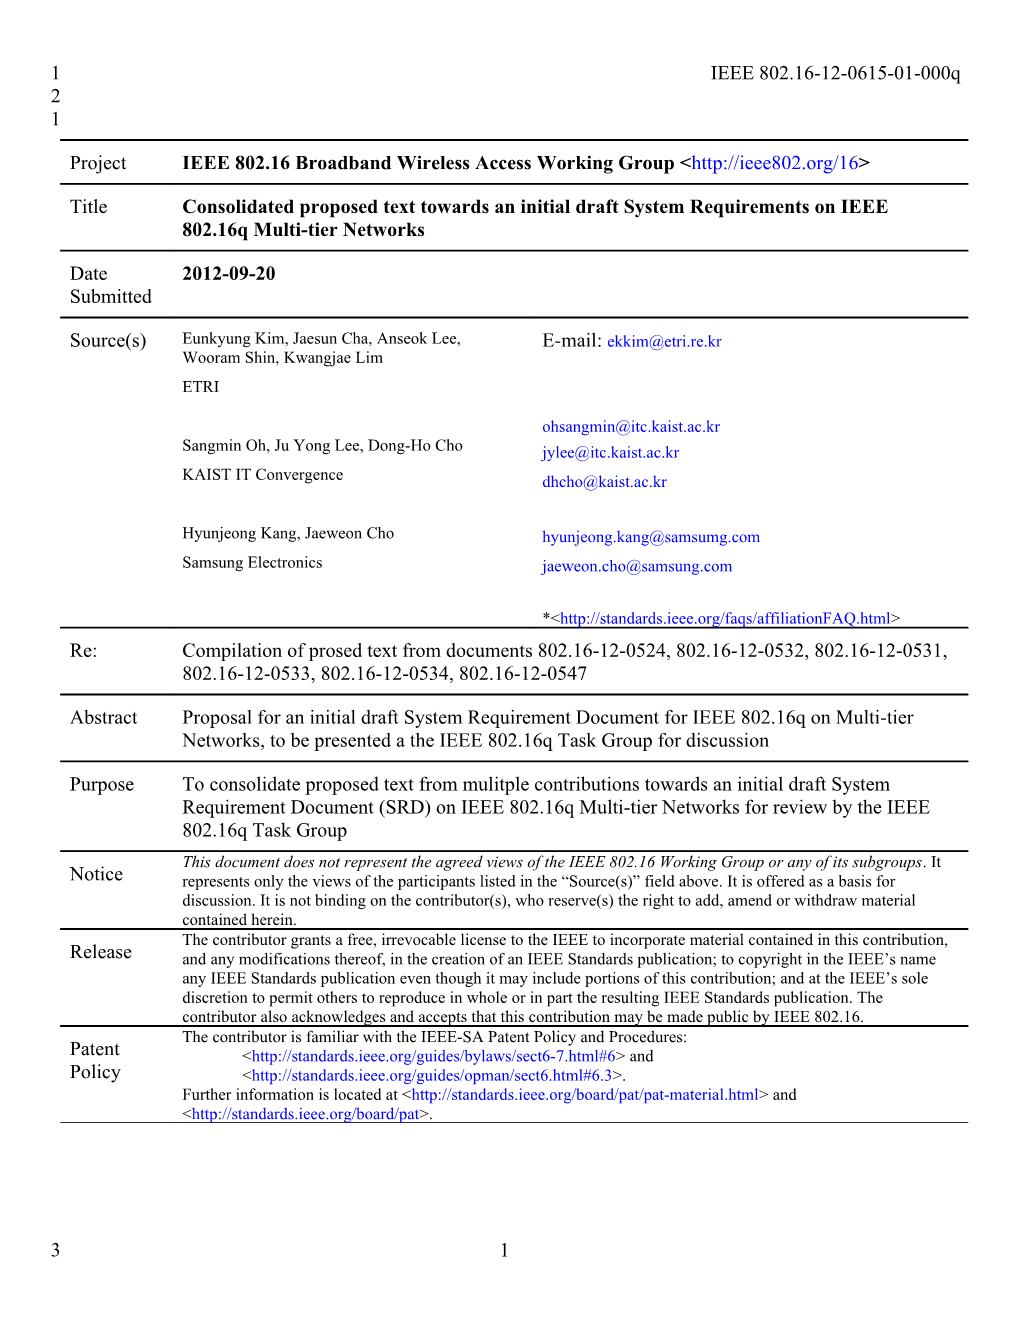 Consolidated Proposed Text Towards an Initial Draft System Requirements on IEEE 802.16Q